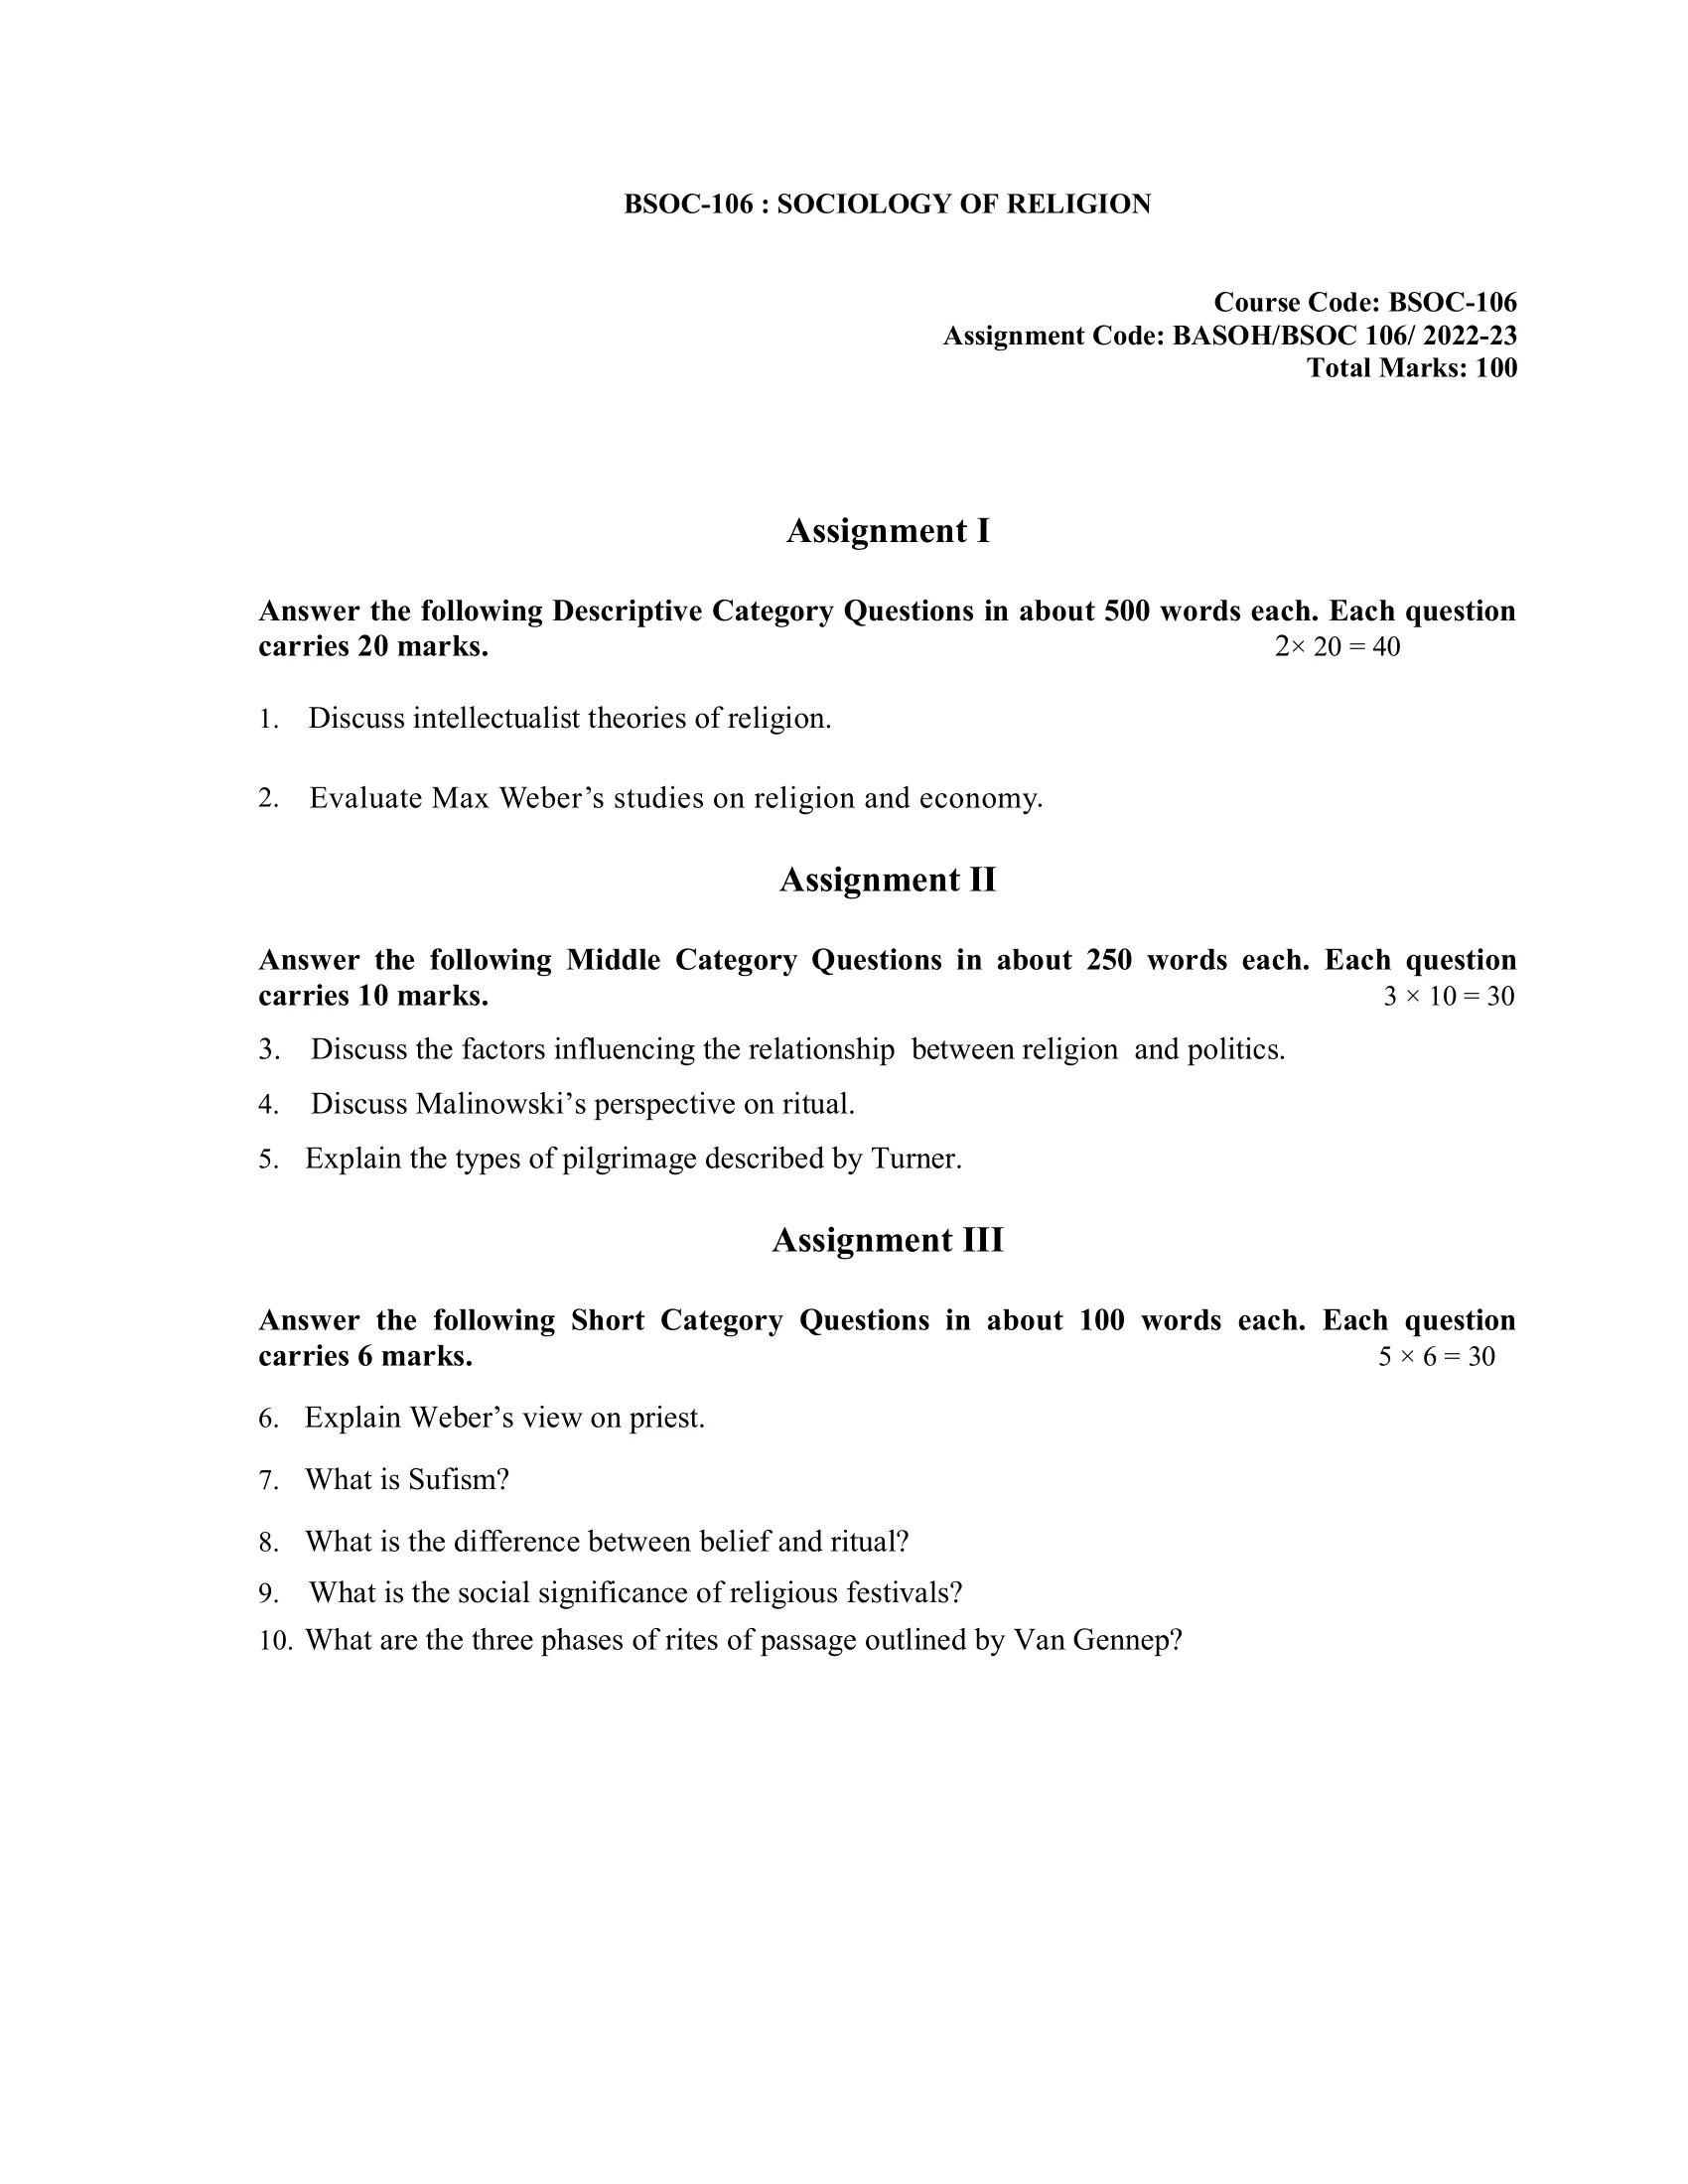 BSOC 106 IGNOU BAG Solved Assignment-SOCIOLOGY OF RELIGION 